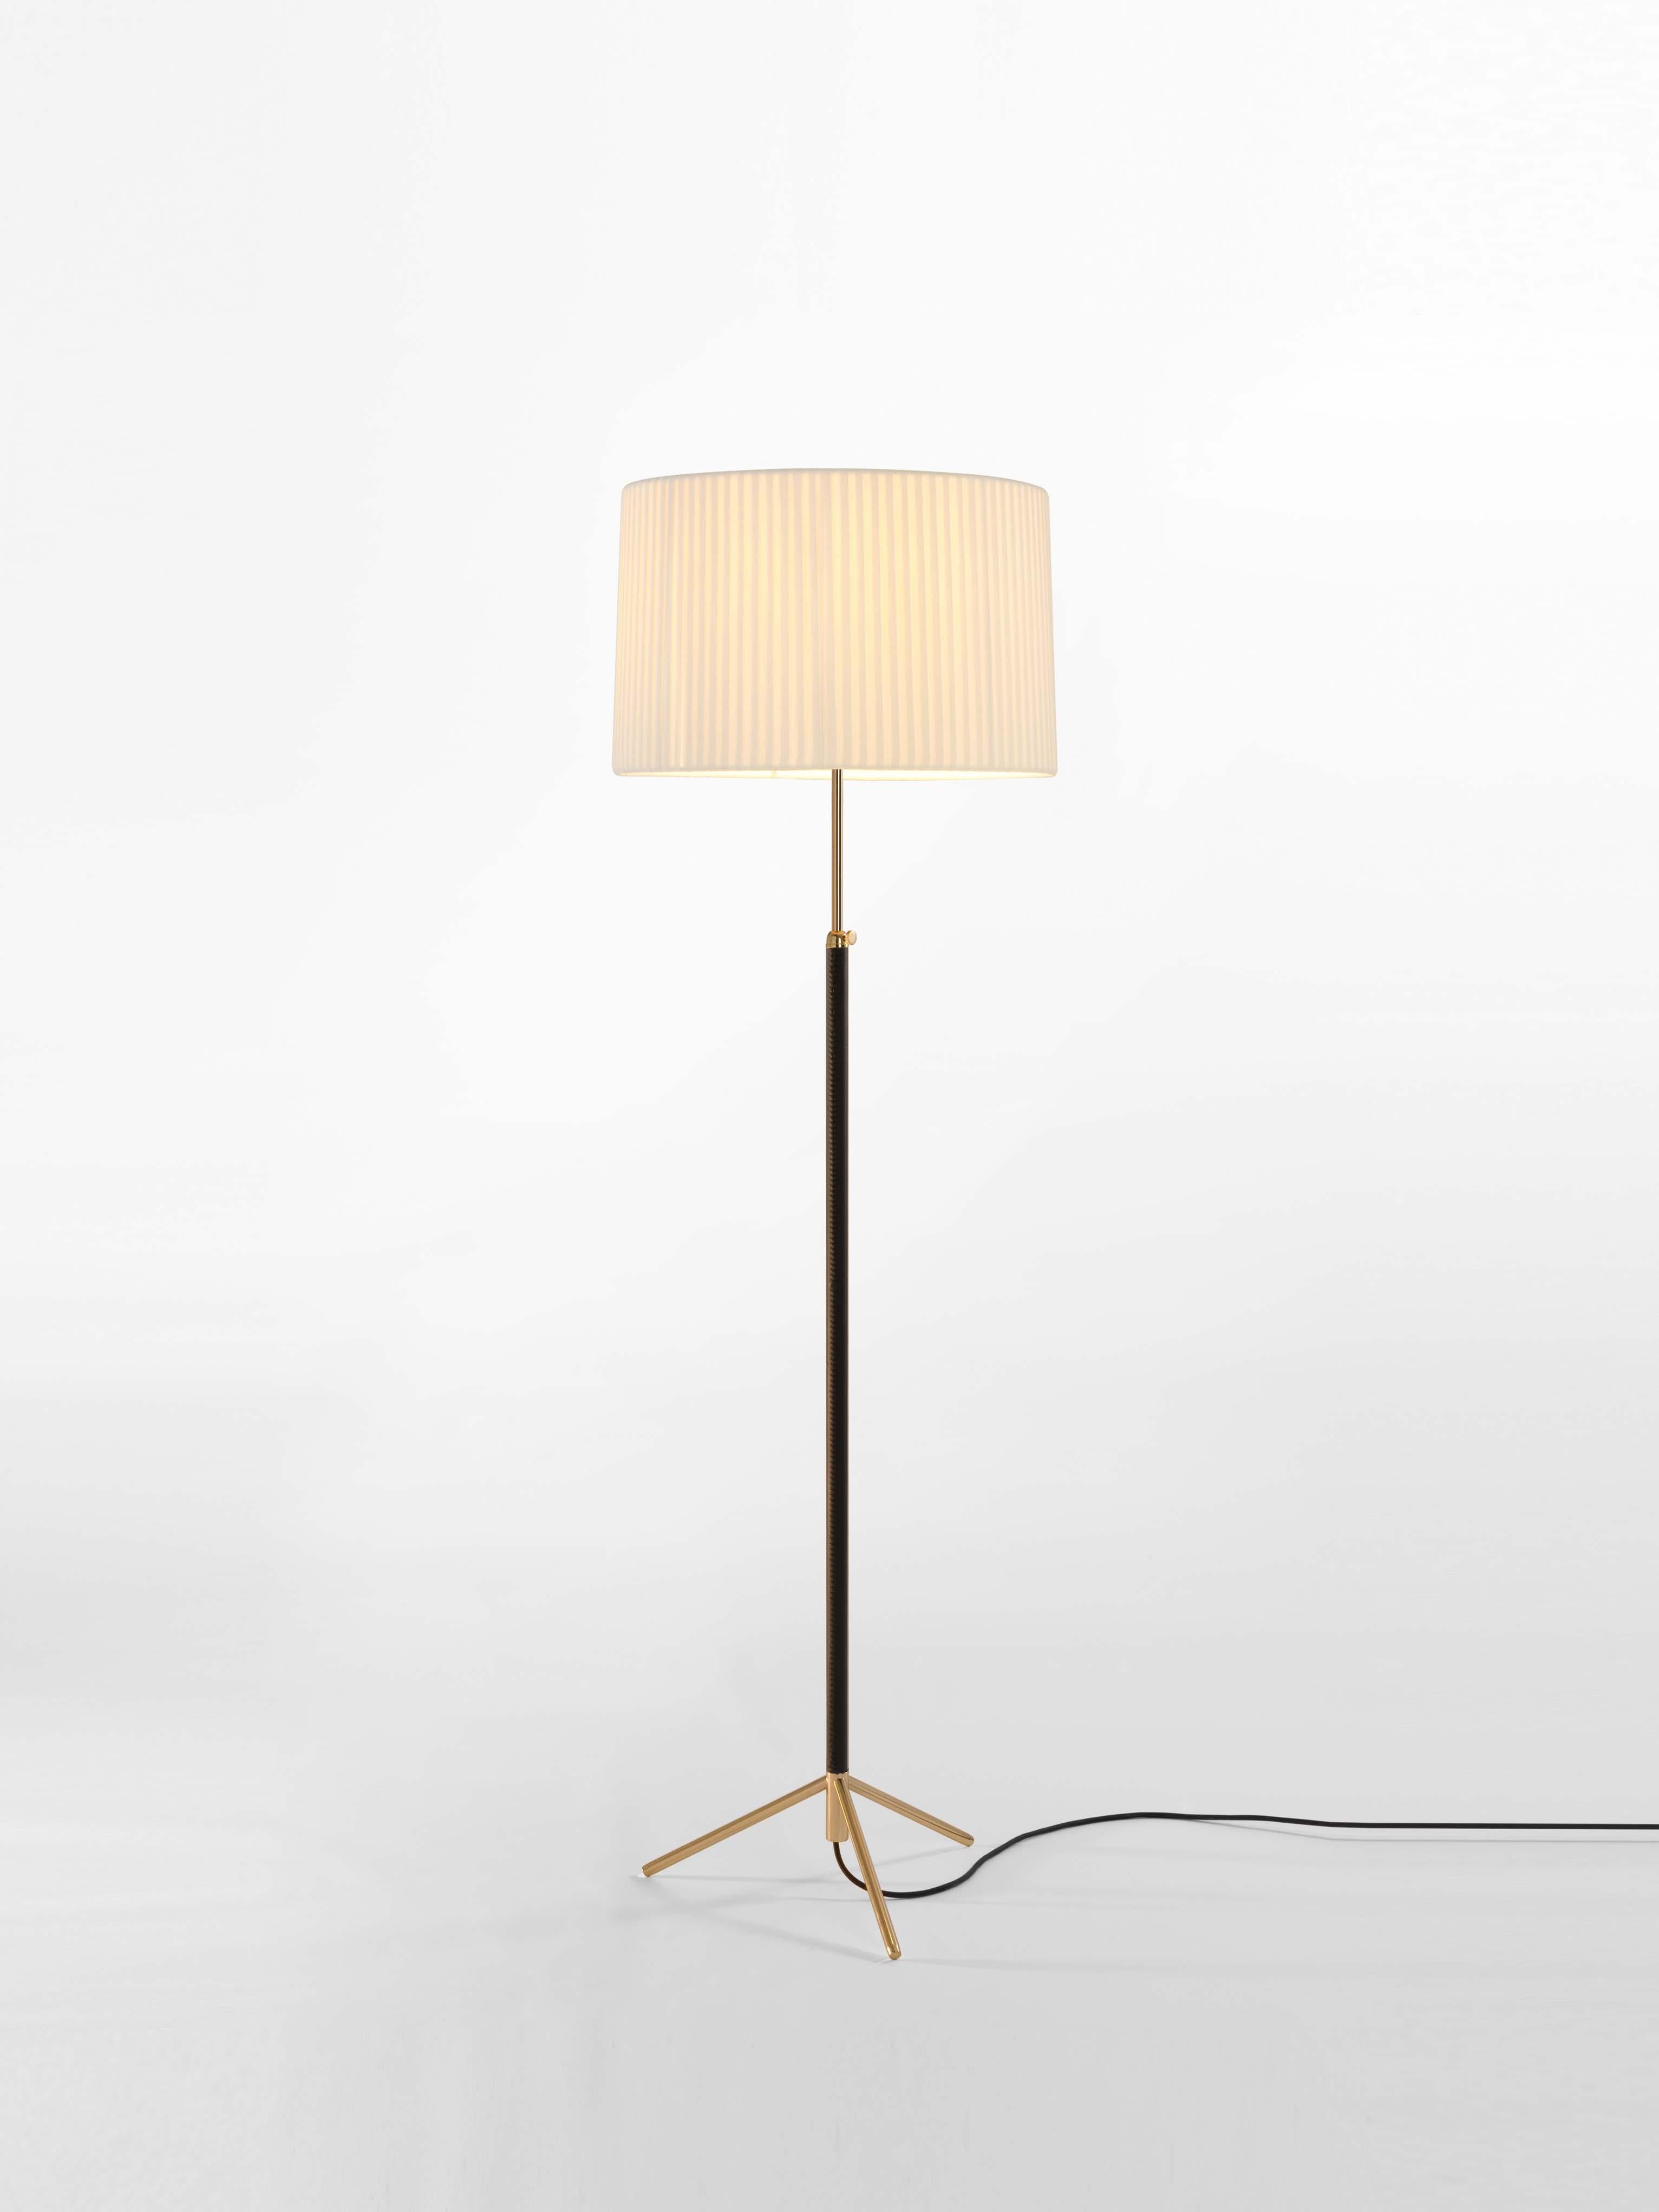 Natural and brass Pie de Salón G2 floor lamp by Jaume Sans
Dimensions: D 45 x H 120-160 cm
Materials: Metal, leather, ribbon.
Available in chrome-plated or polished brass structure.
Available in other shade colors and sizes.

This slender